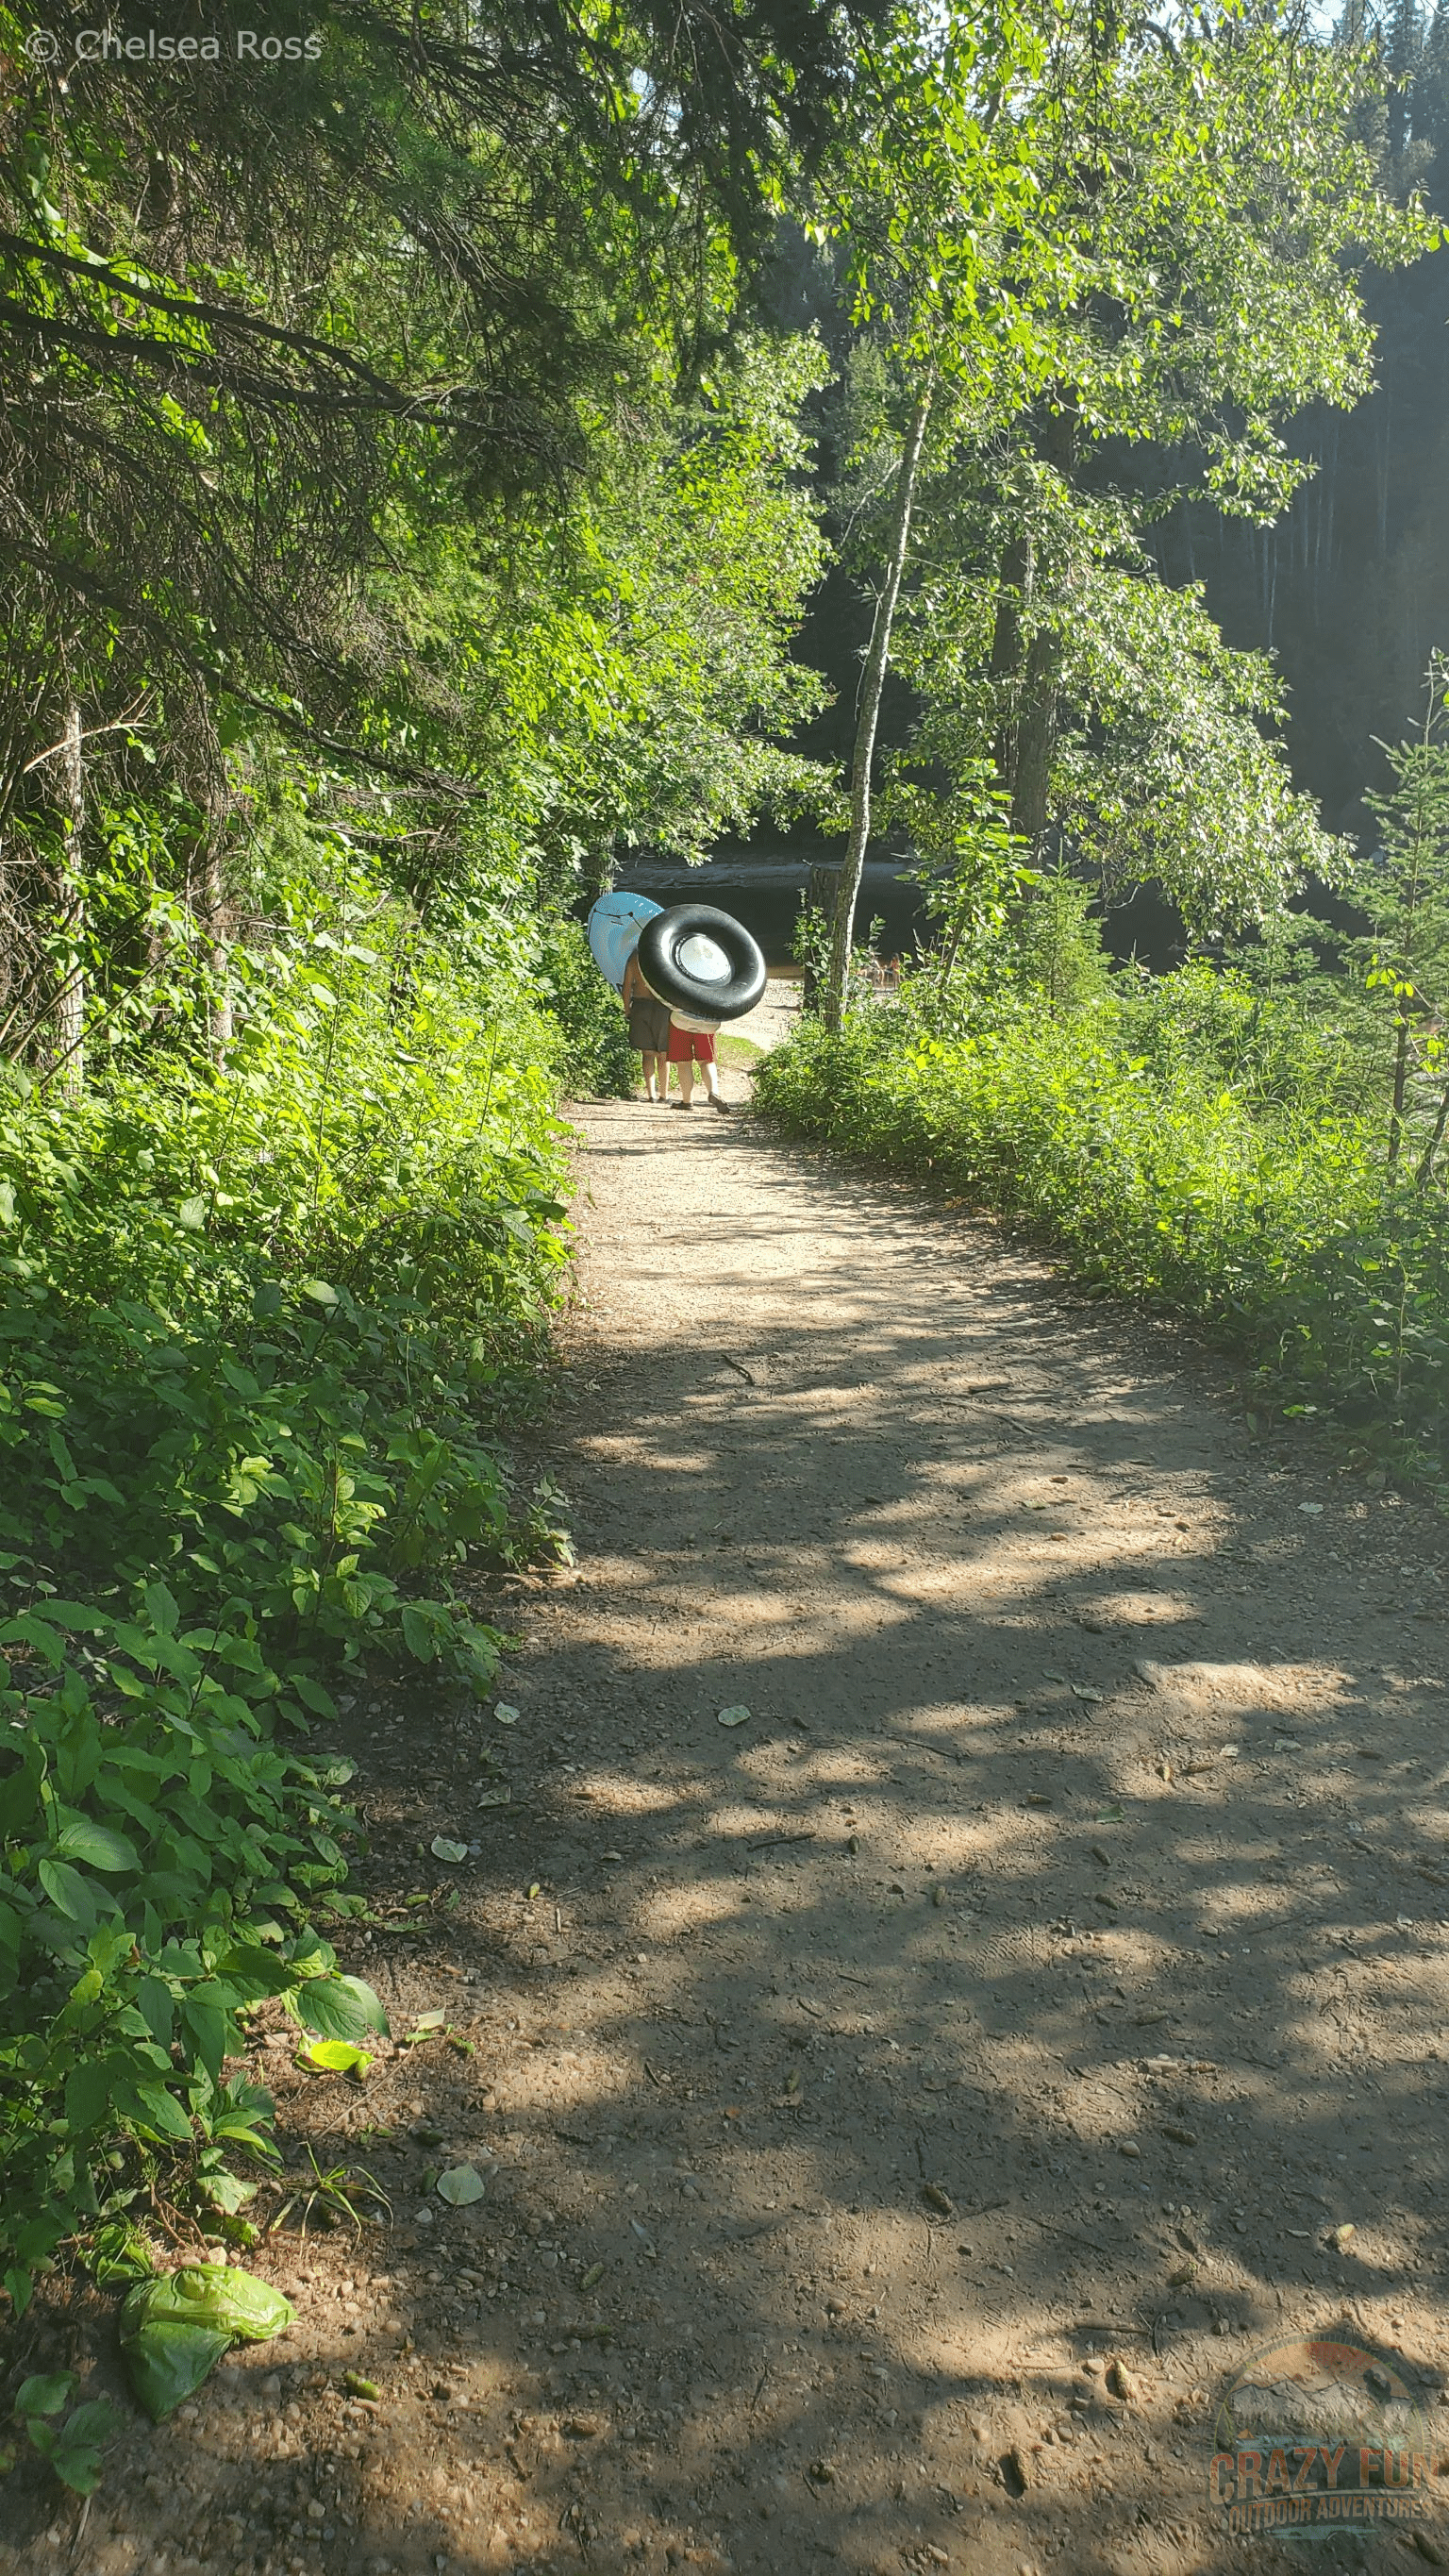 A large path to take down to the river. Tubers can be seen in front.